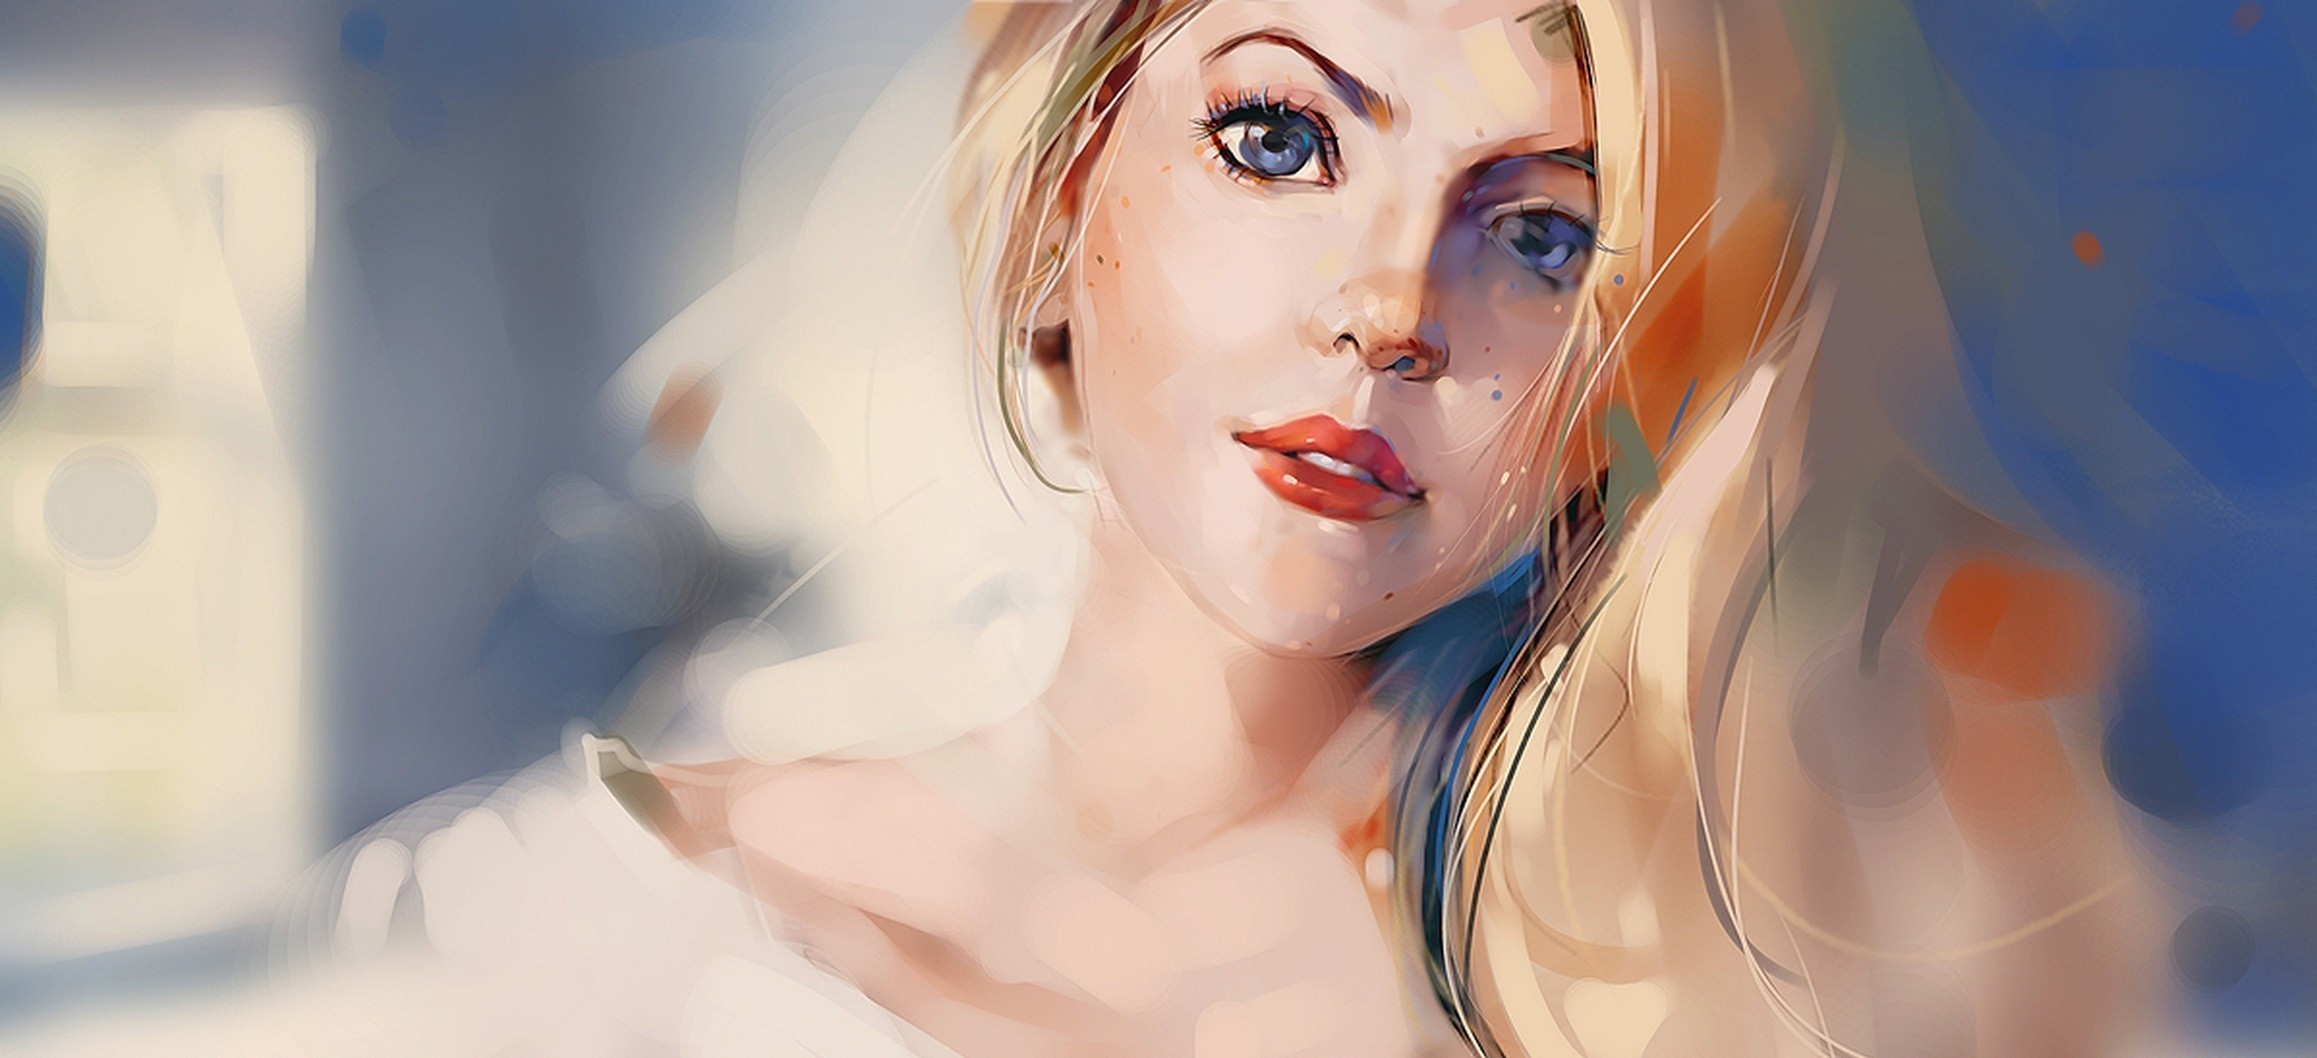 Artistic Drawing Woman Girl Blonde Face Blue Eyes 2317x1058